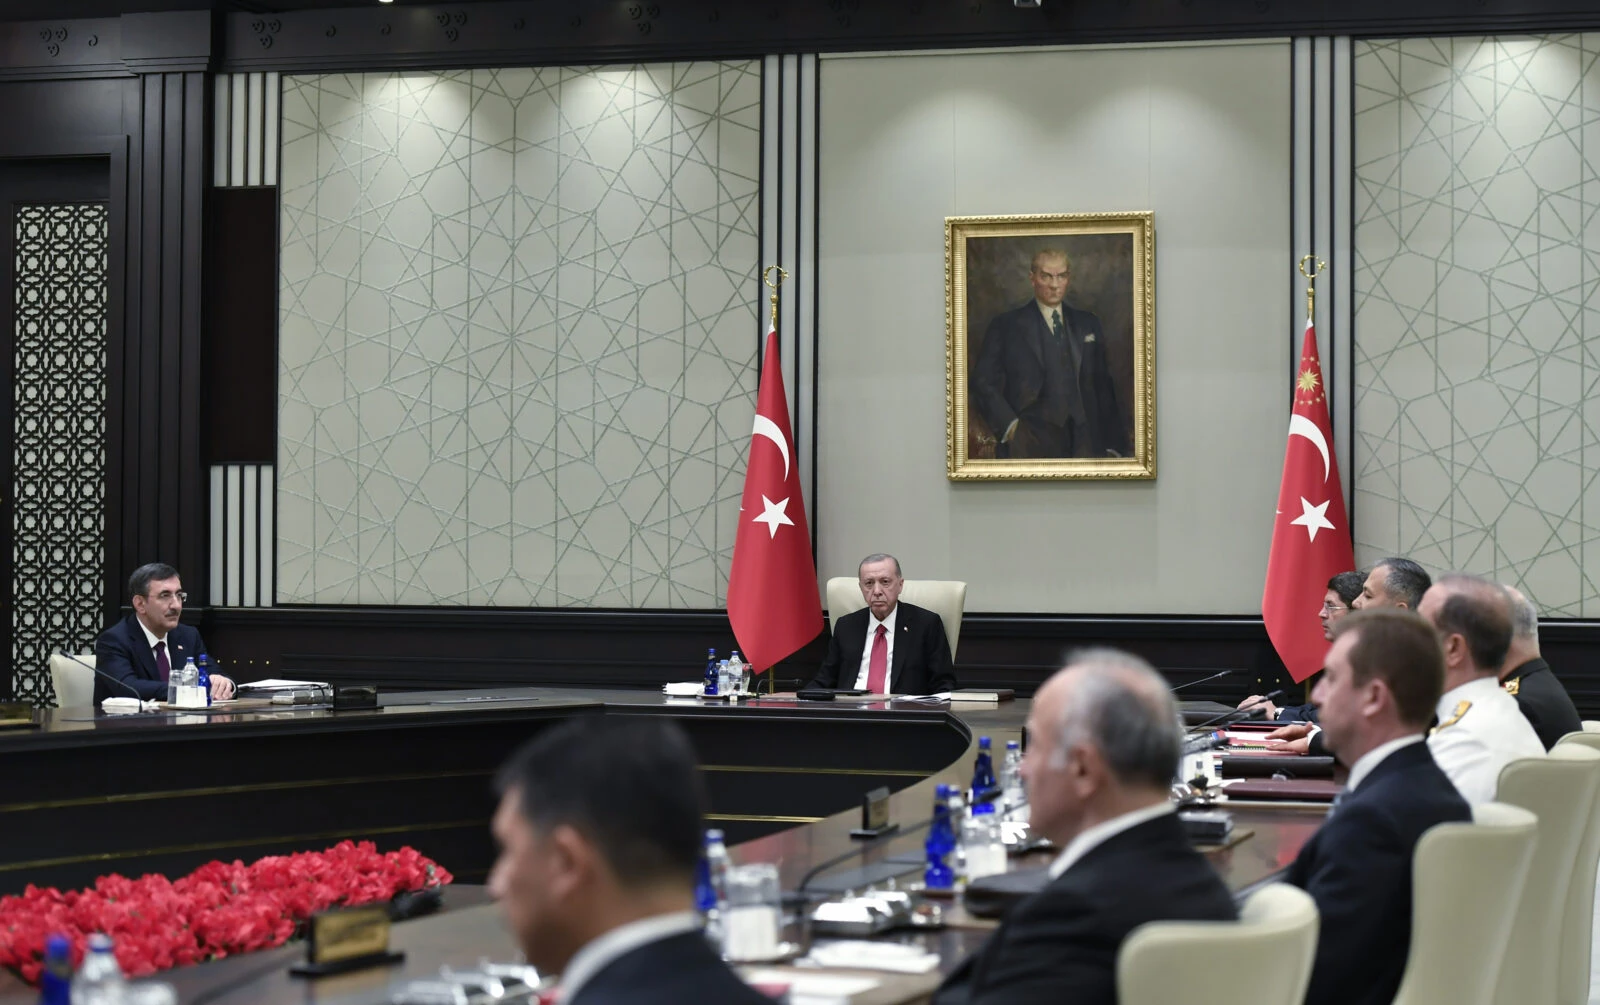 Firm stance against terrorism and global conflicts: Türkiye’s National Security Council